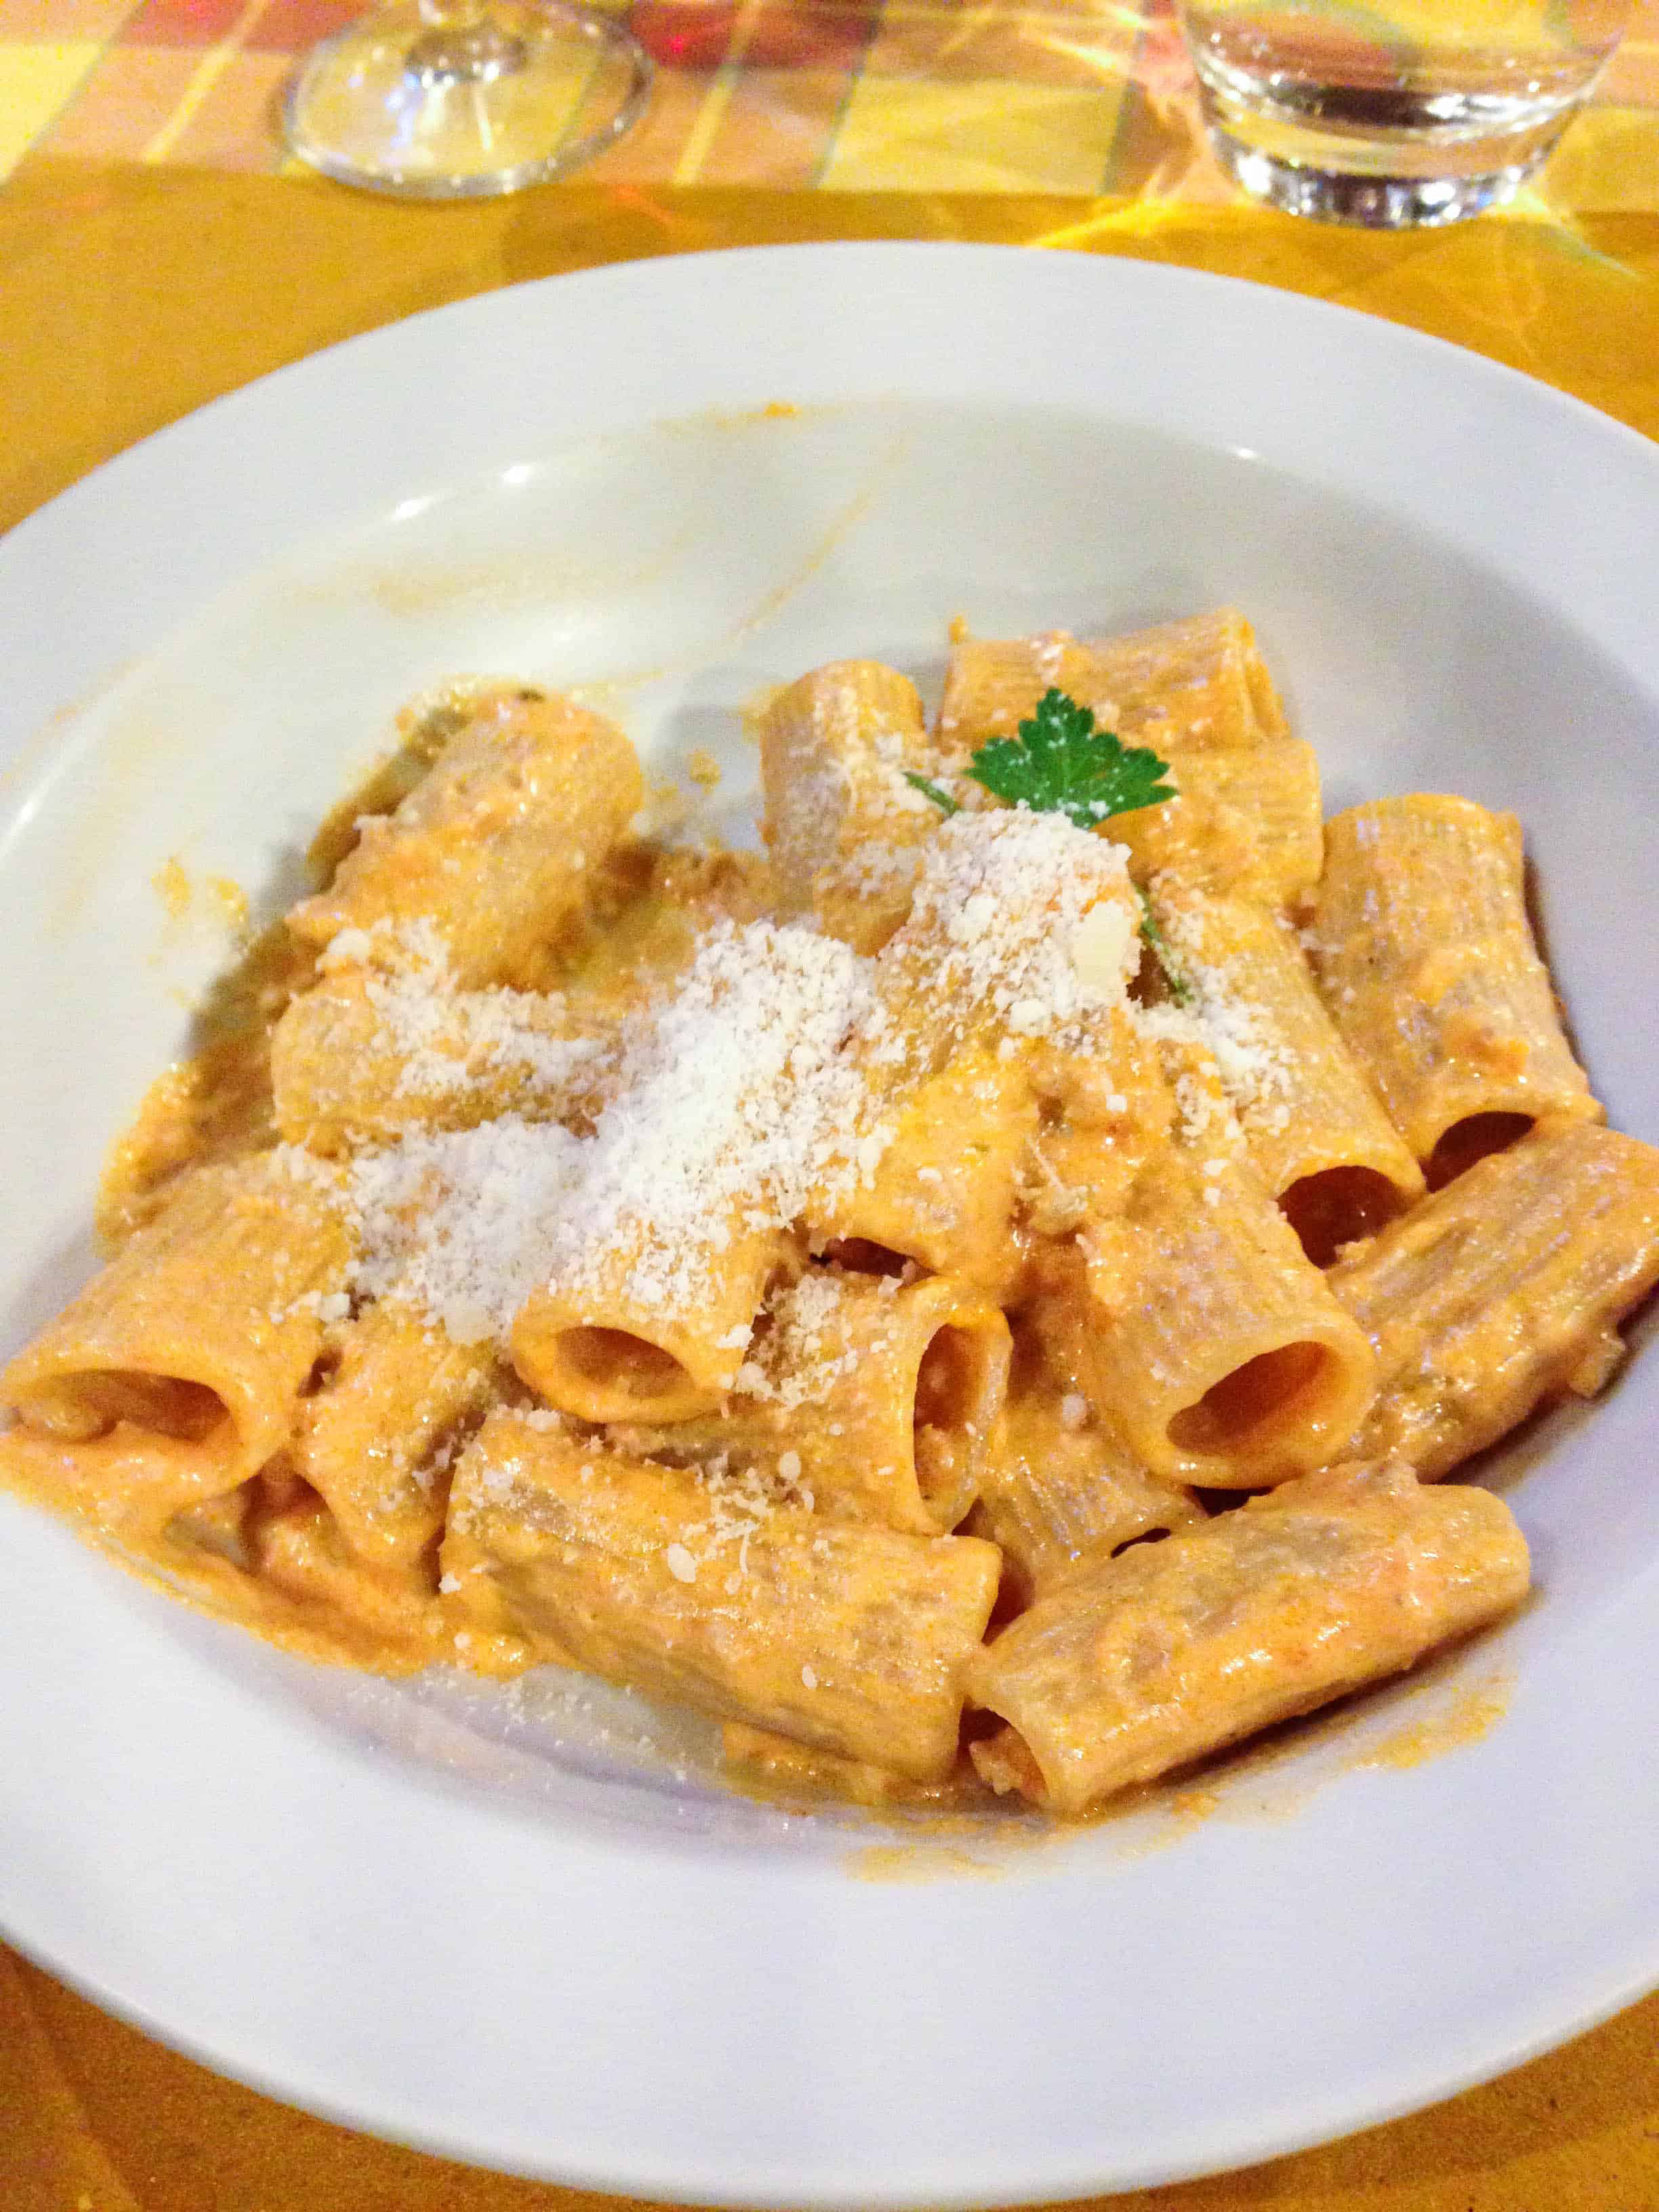 A shallow bowl of rigatoni in cream sauce.